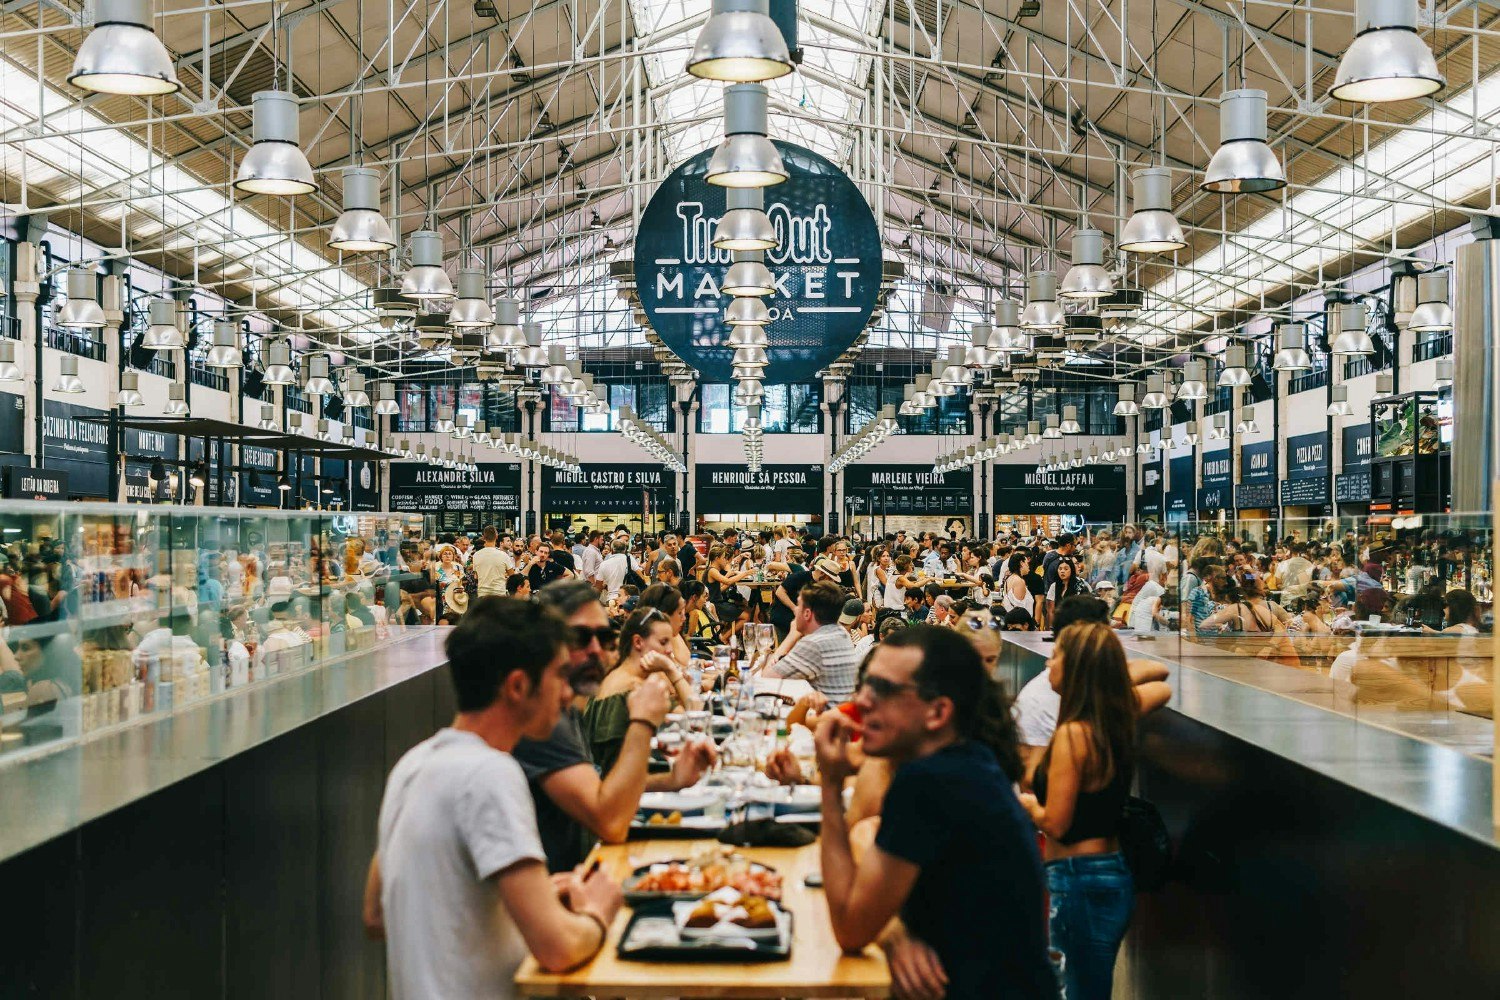 People dining inside the Time Out Market food hall in Mercado da Ribeira in Lisbon.